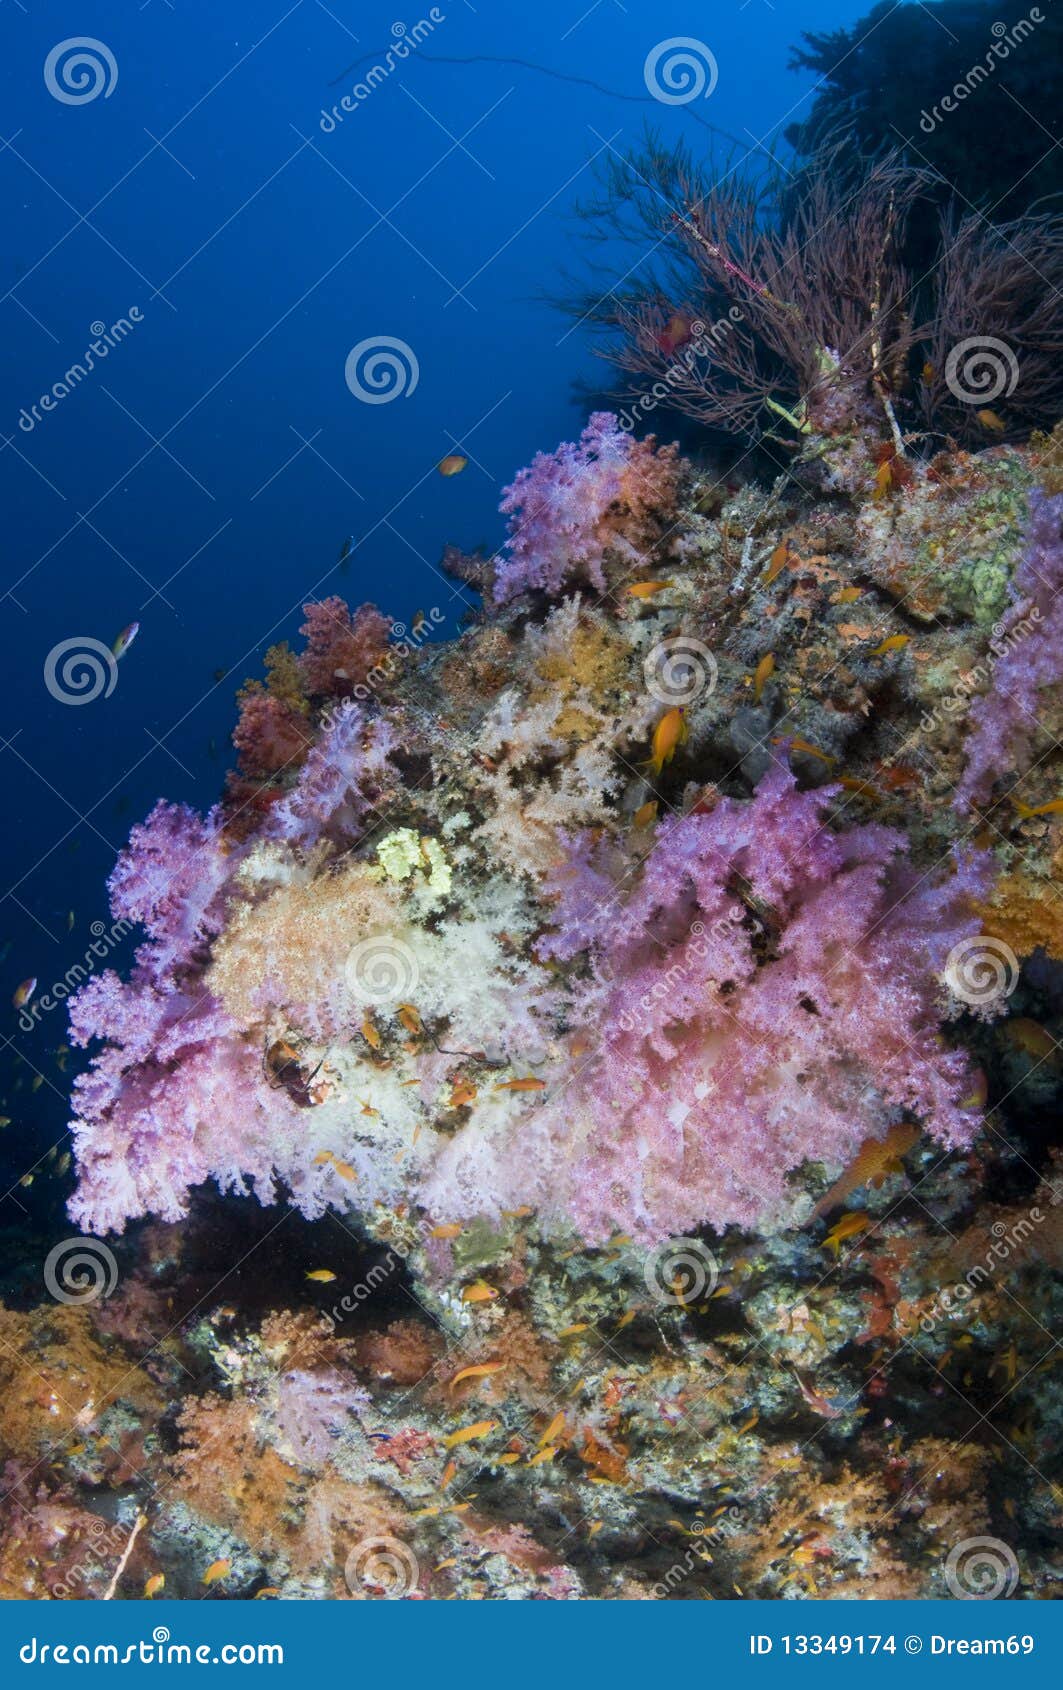 Reef, Colorful Soft Coral, Maldives Stock Photo Image of